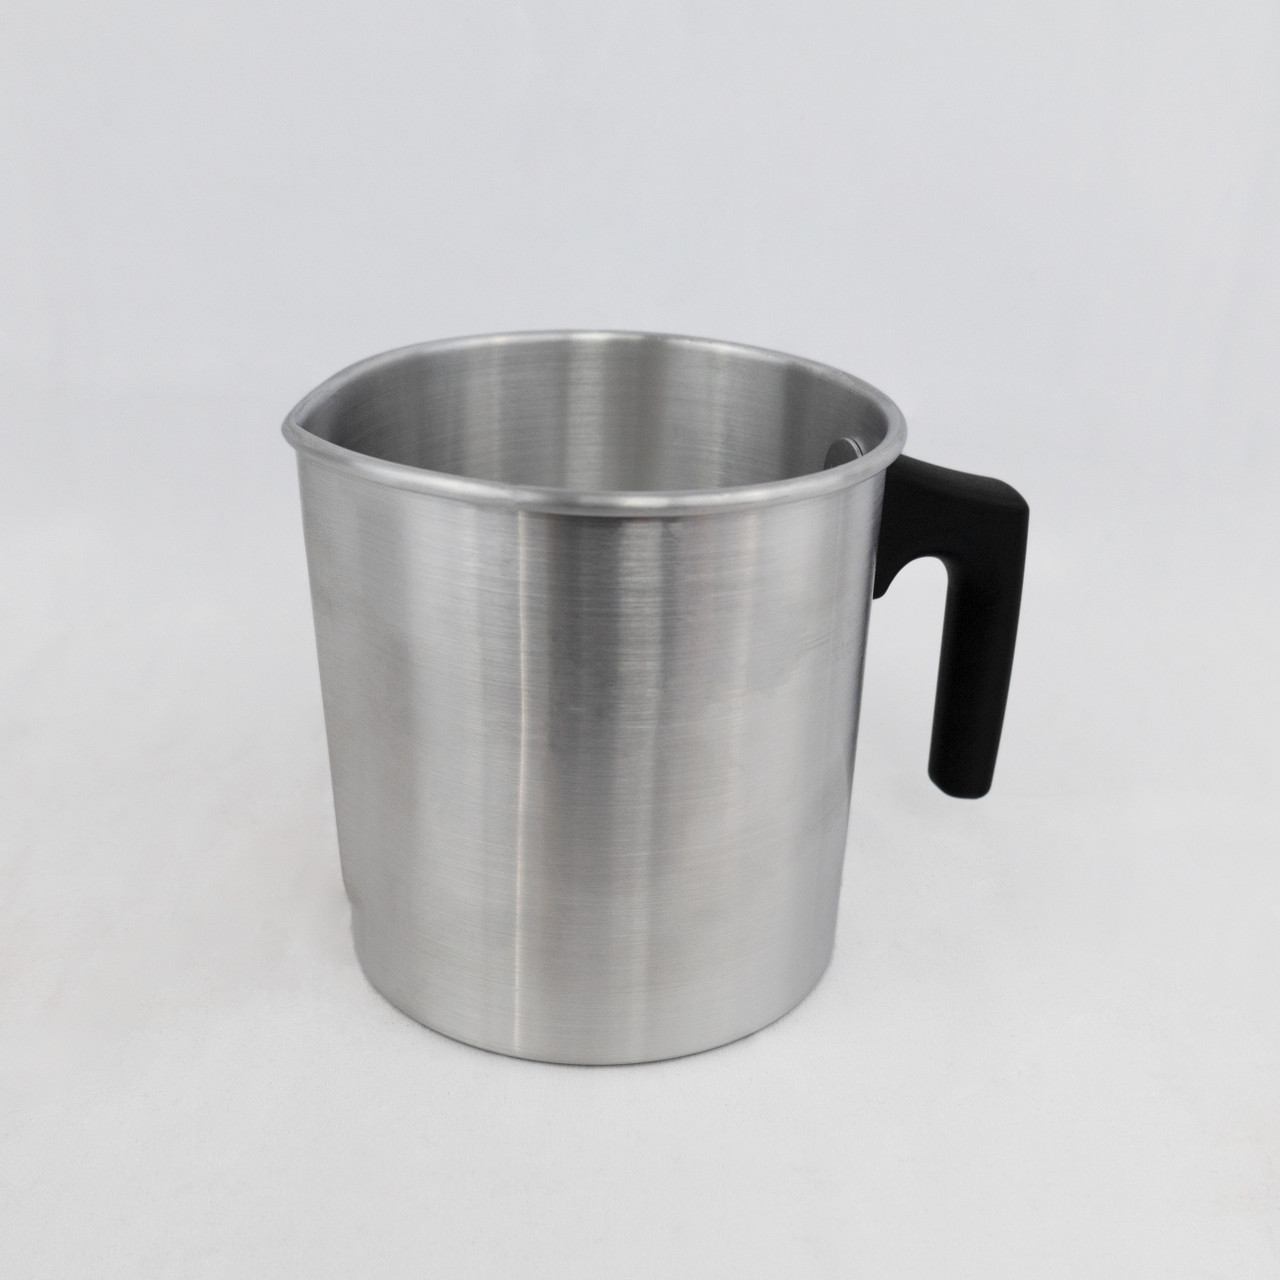 1.2L Wax melting and Pouring Pitcher | Wholesale Supplier